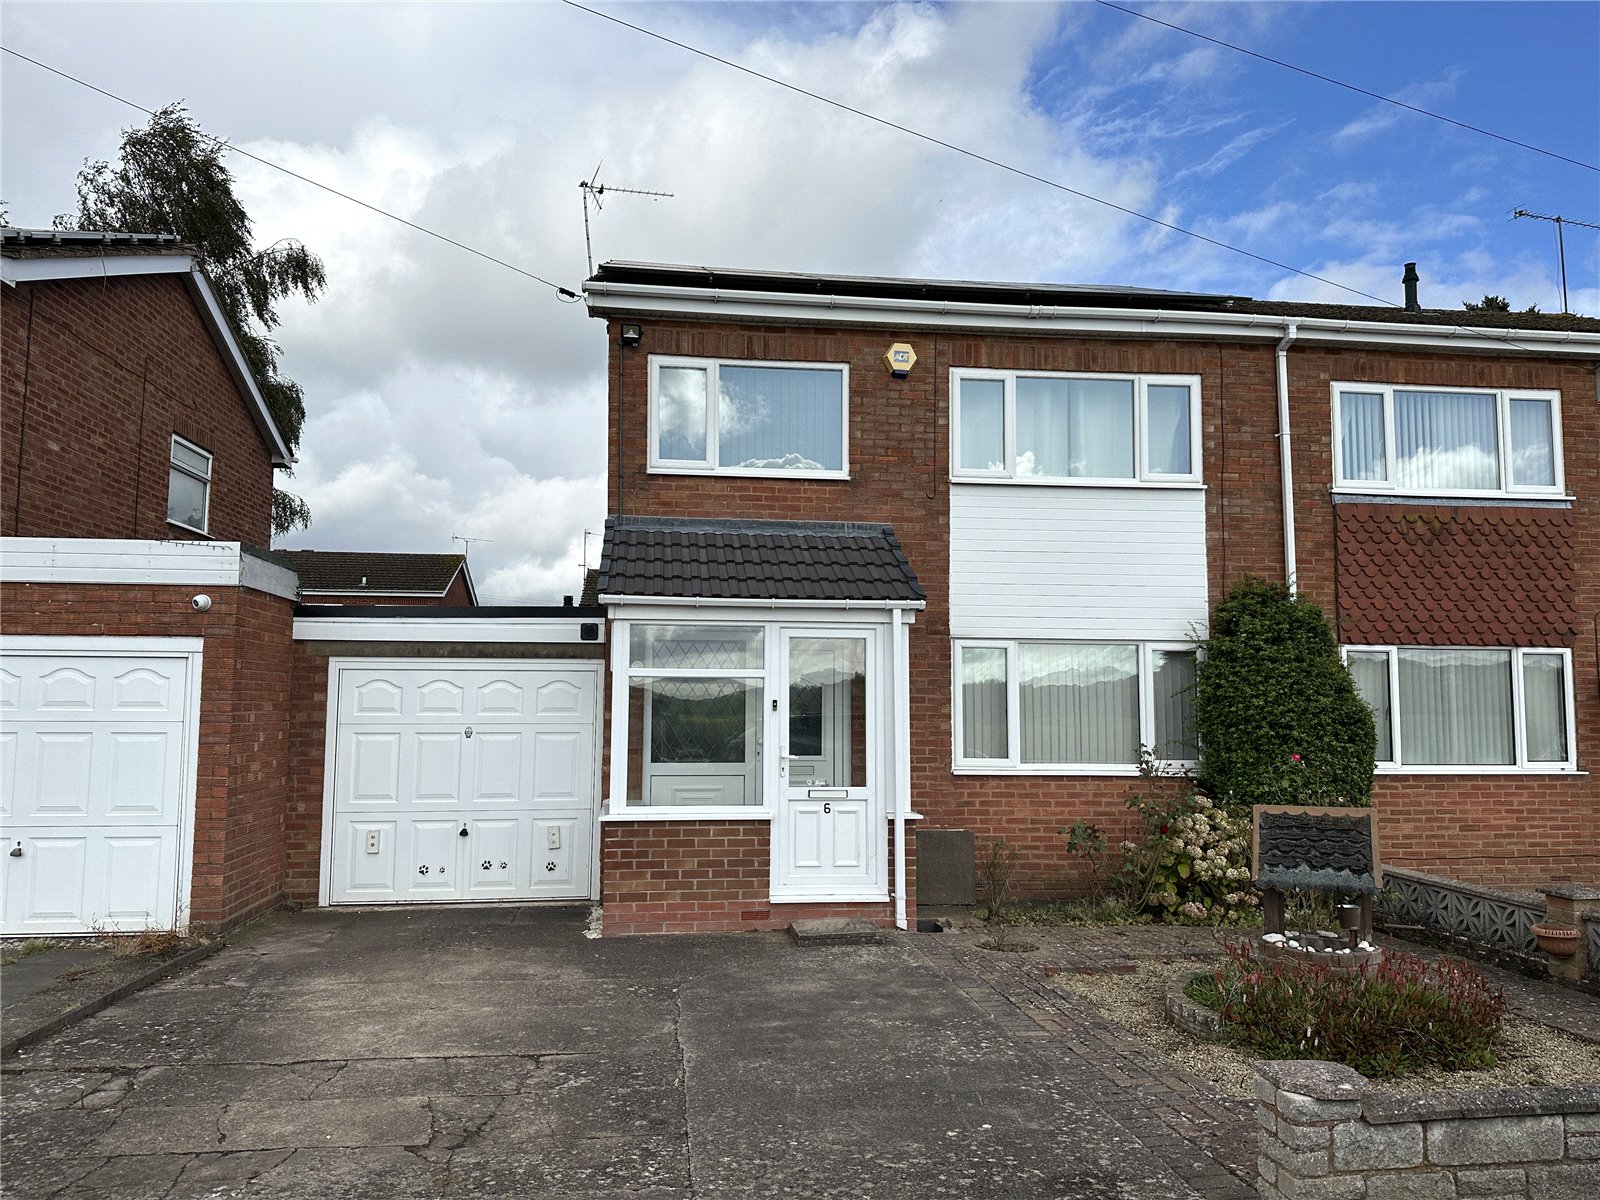 Windsor Drive, Stourport-on-Severn, Worcestershire, DY13